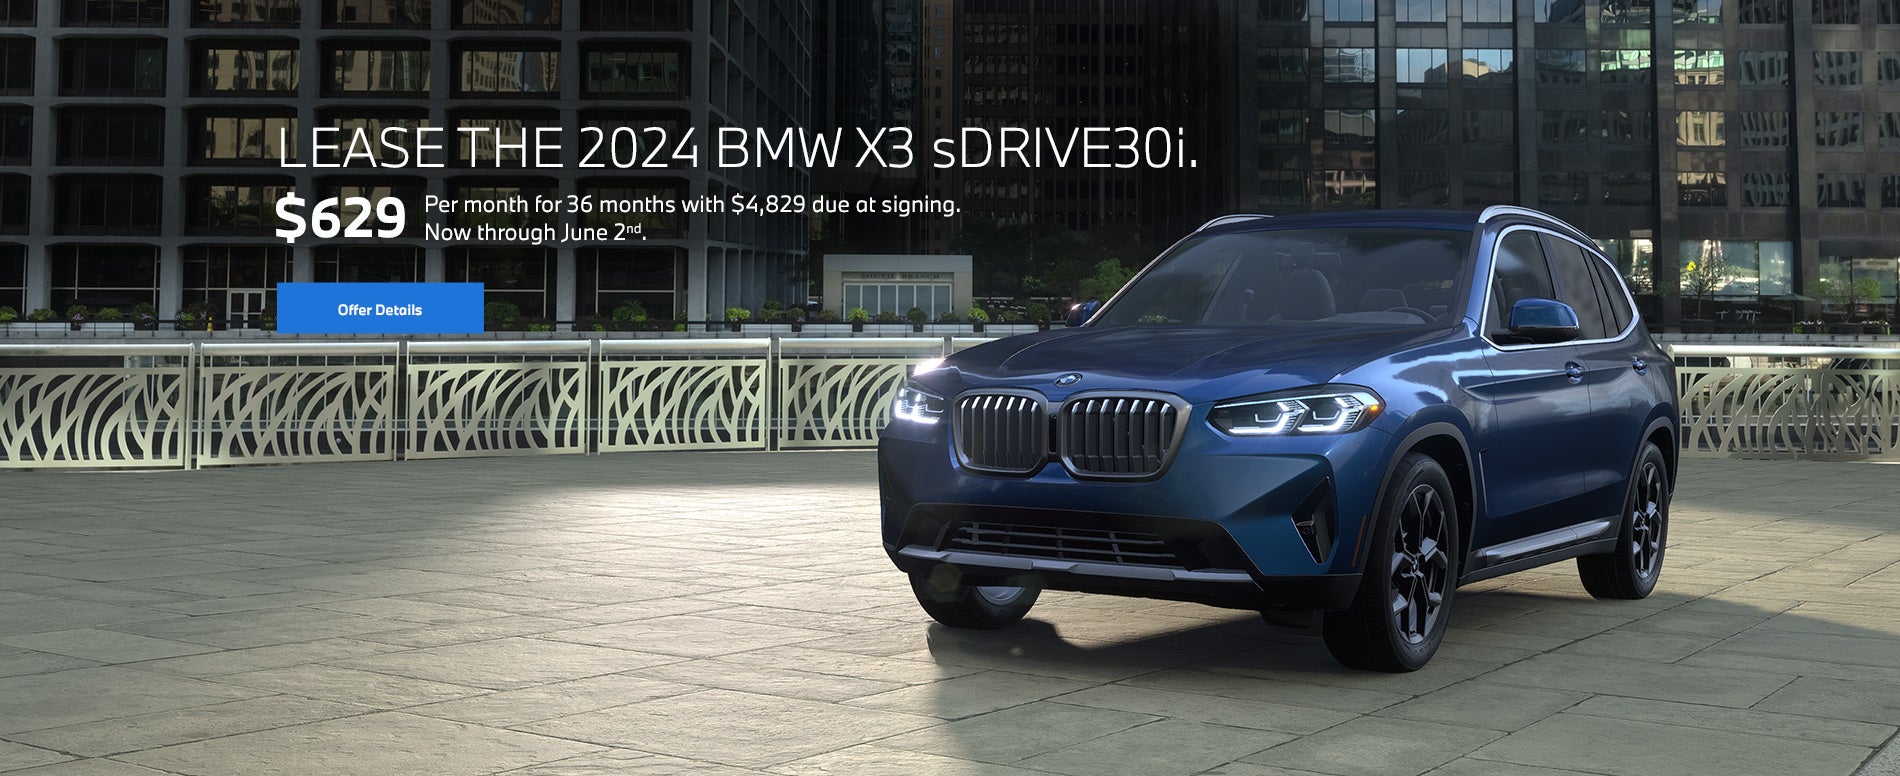 2024 X3 lease starting at $629 per month for 36 months